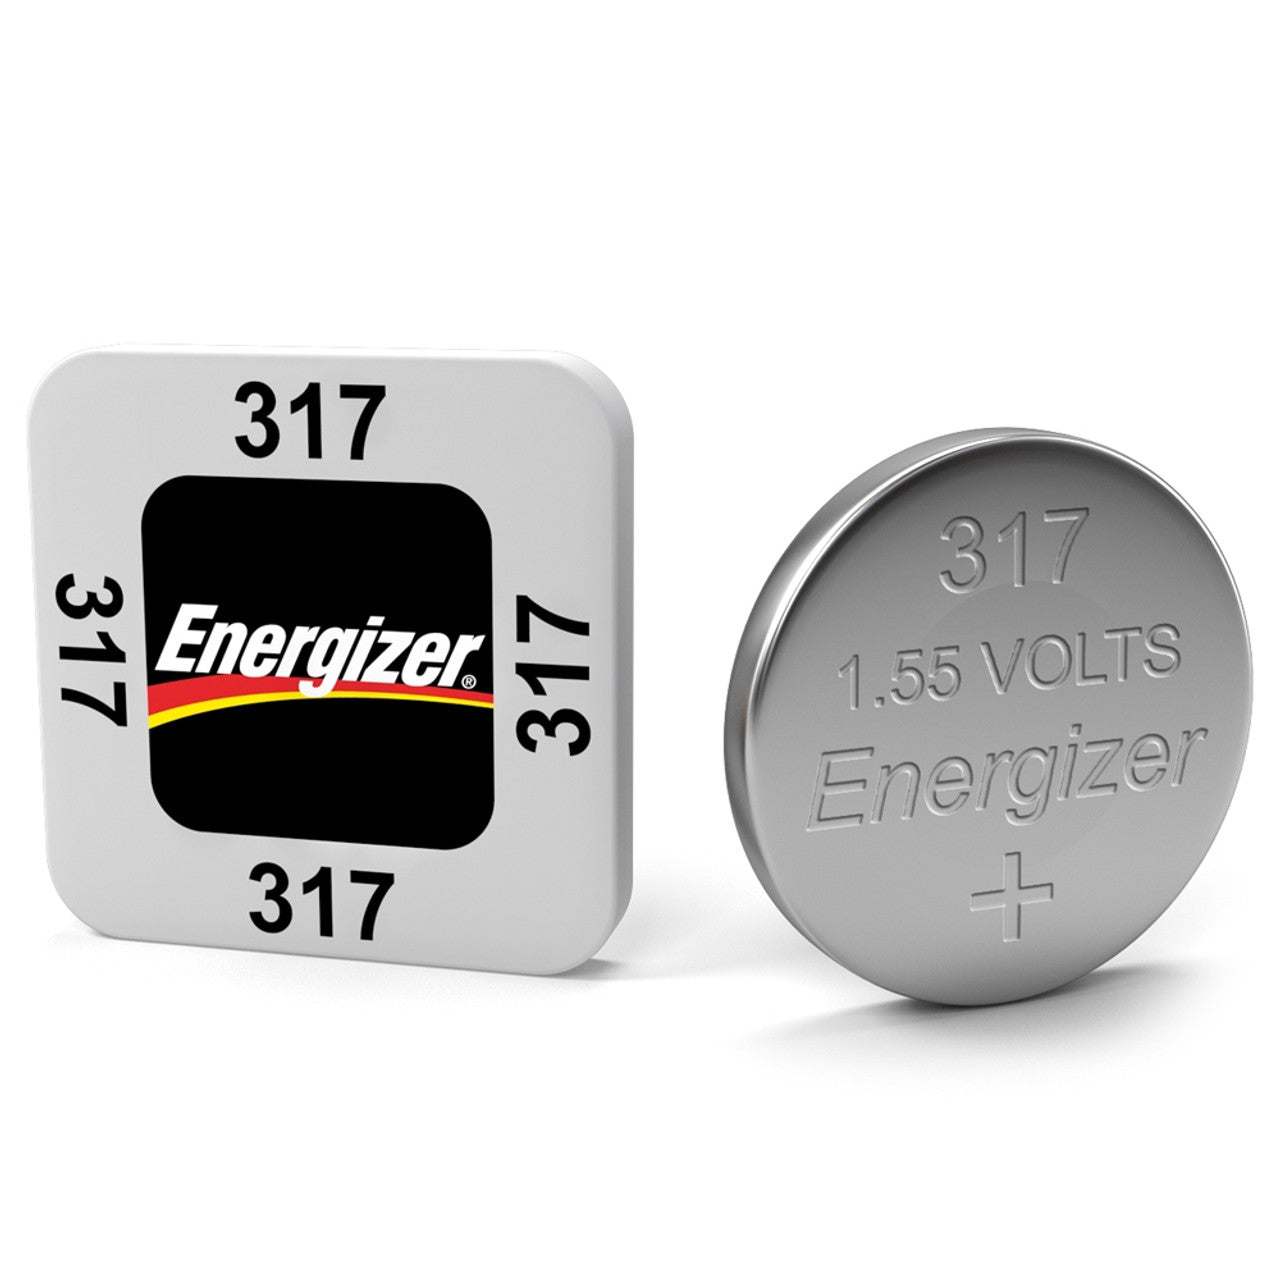 Energizer 317 Silver Oxide Coin Cell, Pack of 1